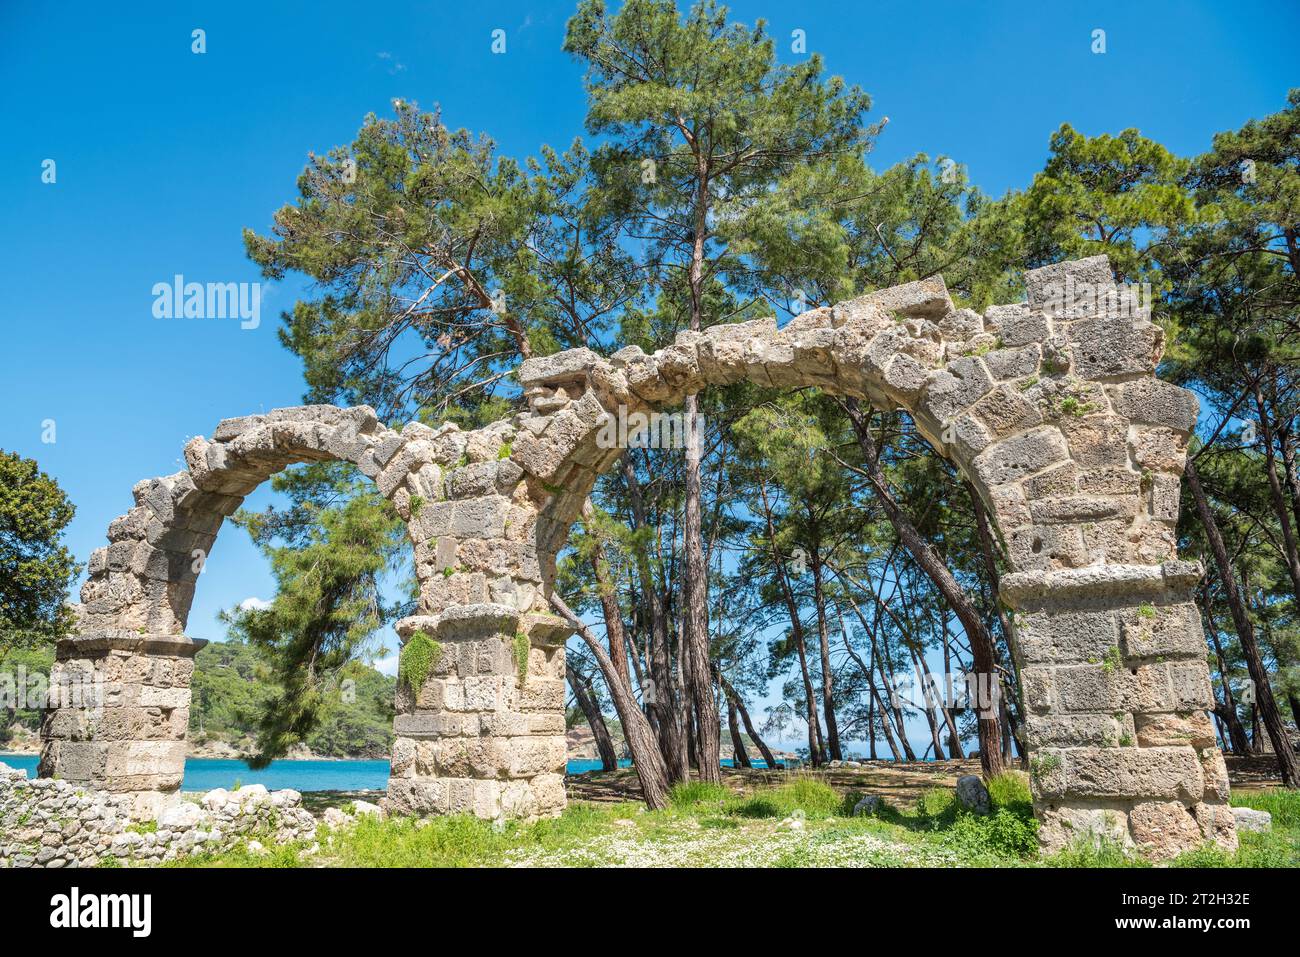 Ruined aqueduct at Phaselis ancient site in Antalya, Turkey. The aqueducts supplied fresh water to public baths and for drinking water. Bridges, built Stock Photo